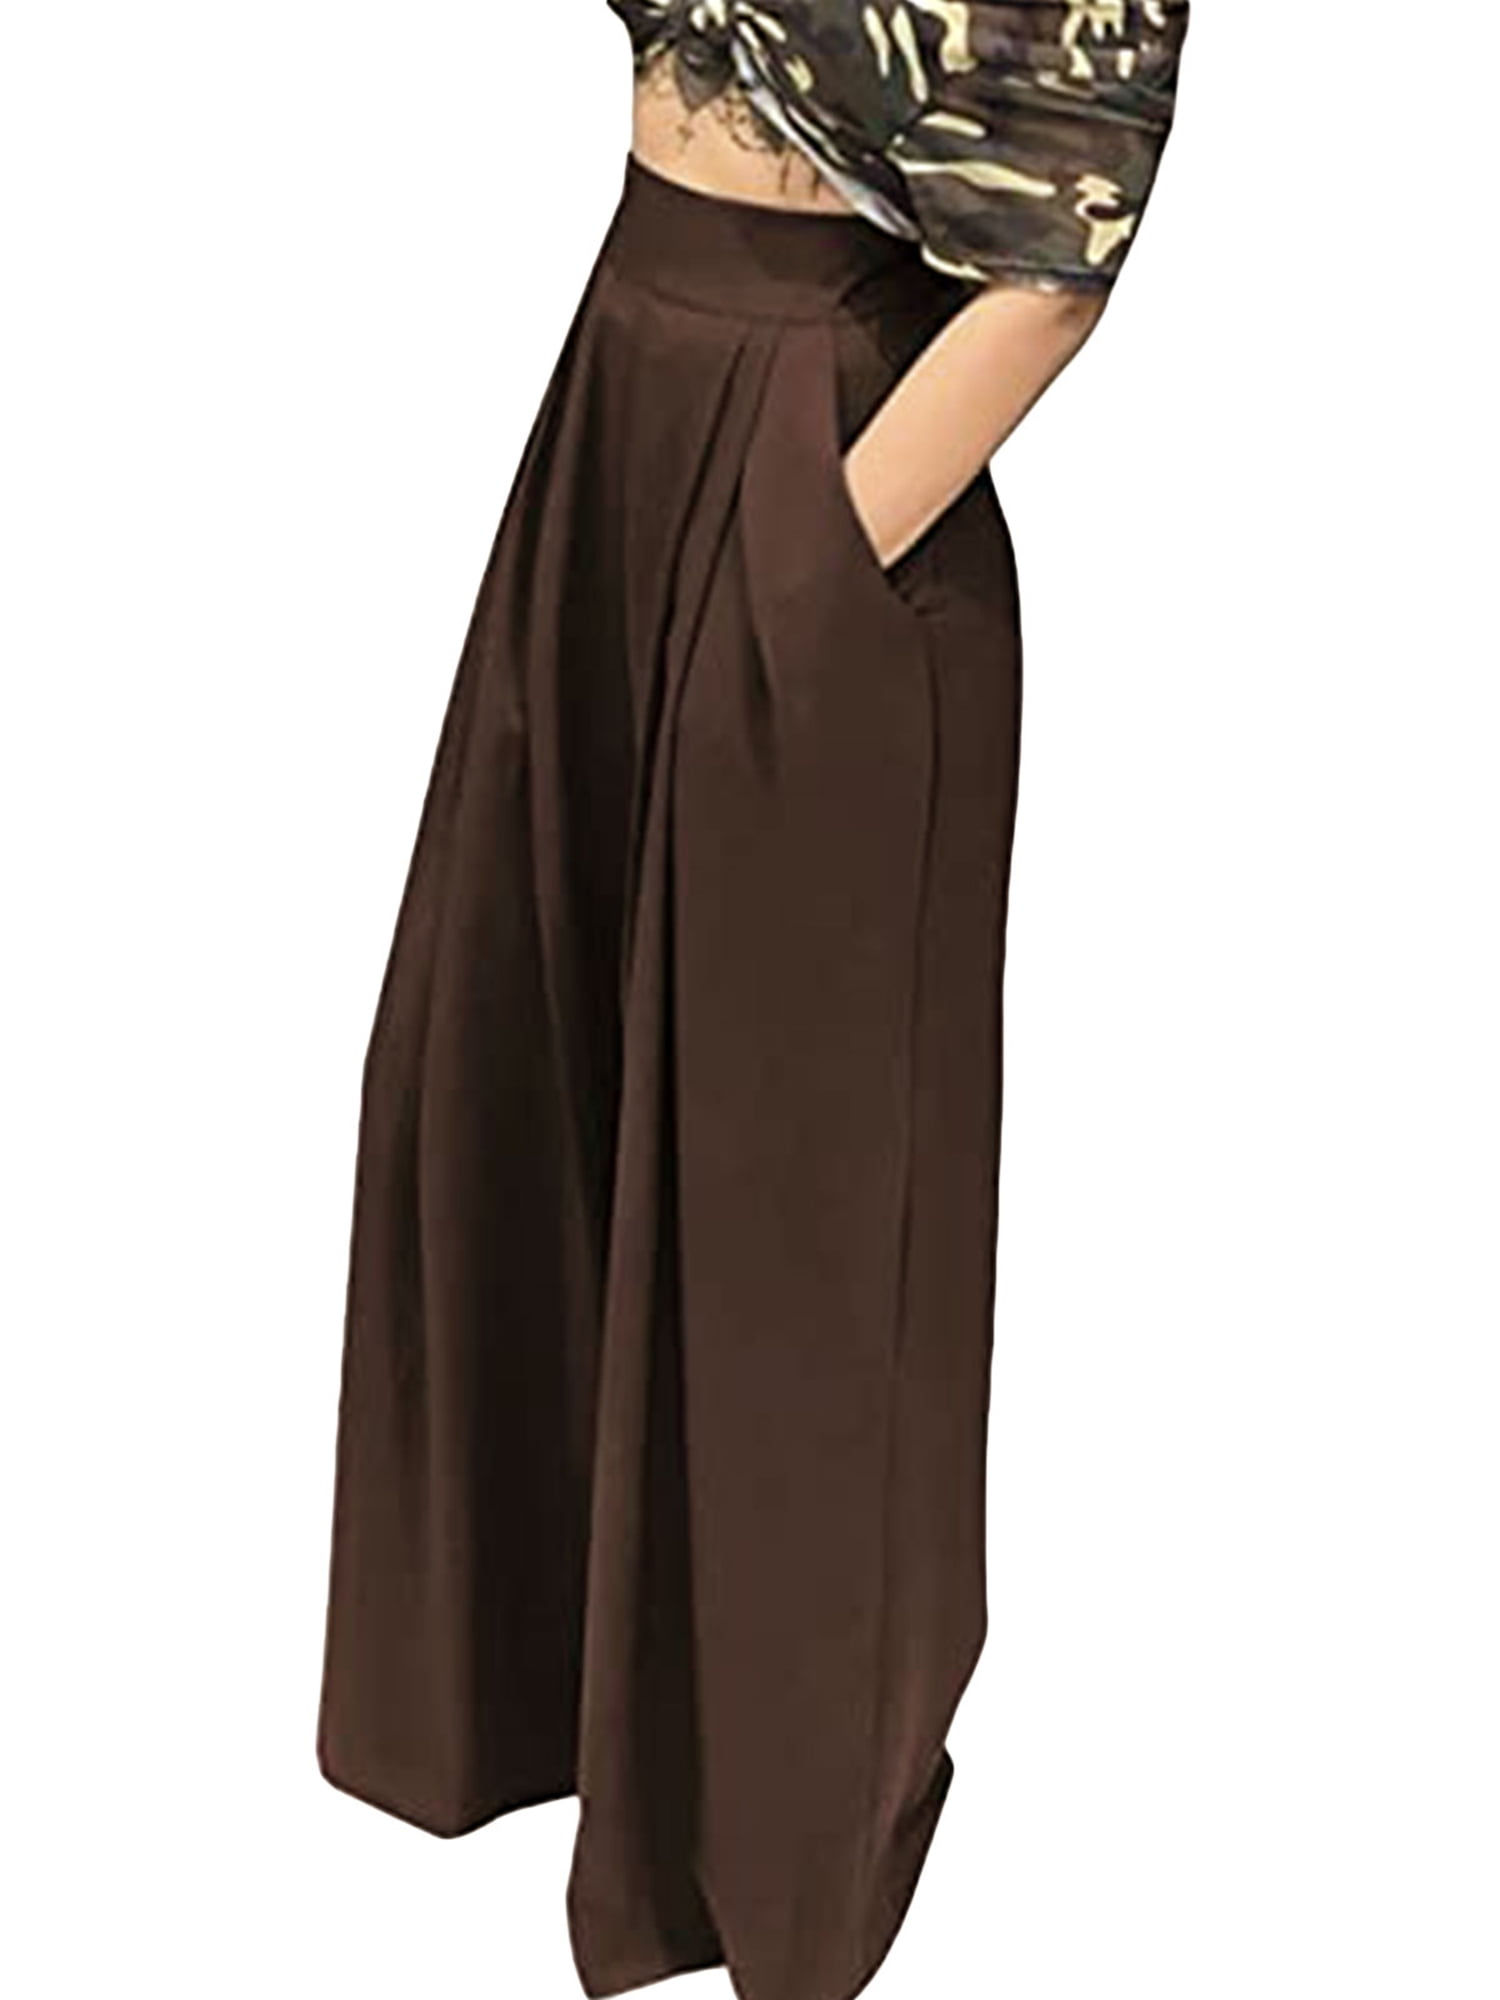 wybzd Women Plus Size Casual Wide-Leg Trousers Stretchy High Waist Loose  Palazzo Pants with Pockets 